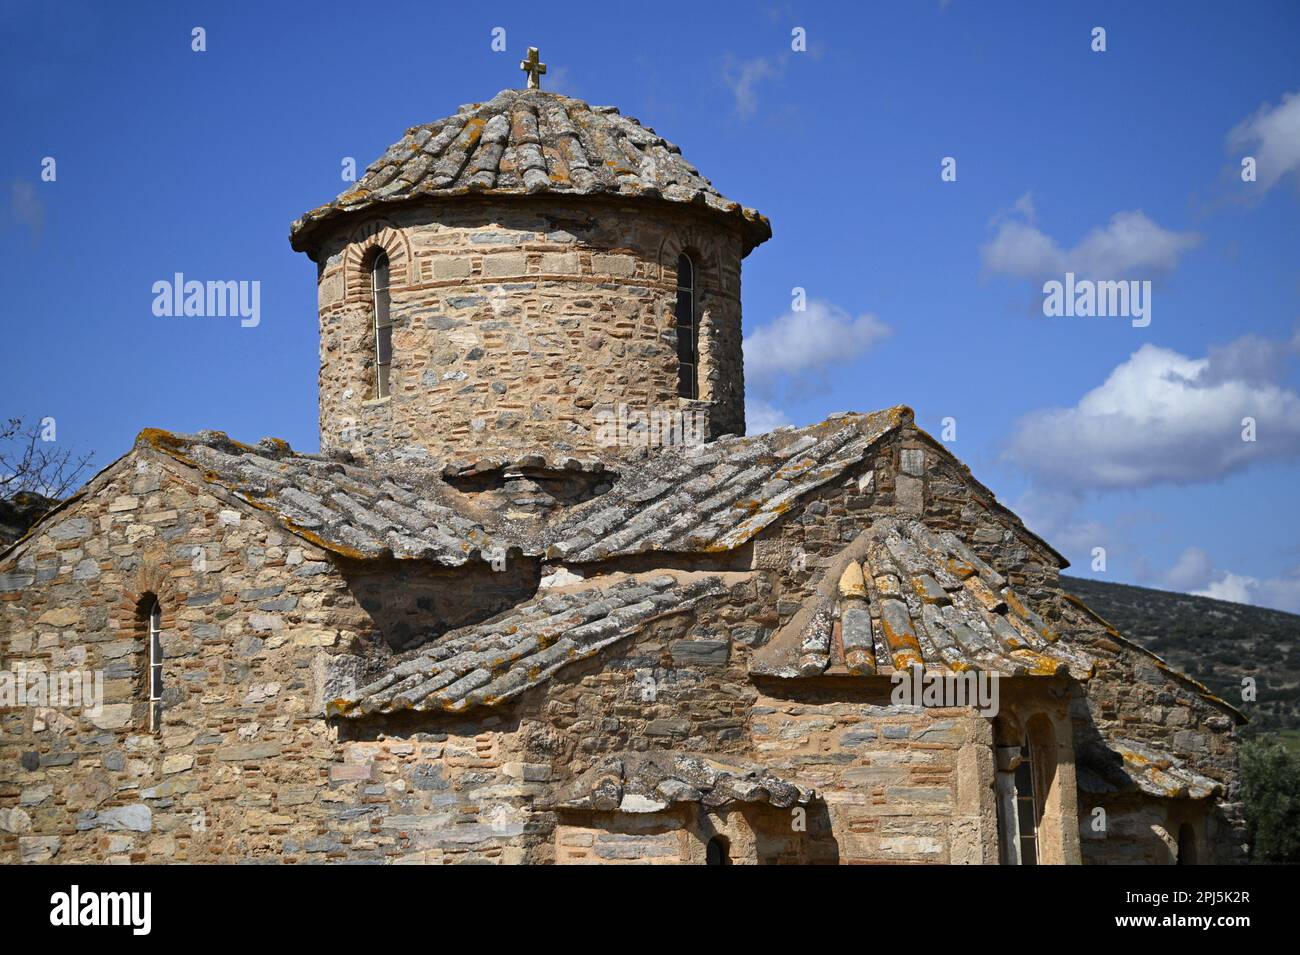 Landscape with scenic exterior view of Aghios Petros a 12th century rectangular cruciform Byzantine church in Kalyvia Thorikou, Attica Greece. Stock Photo